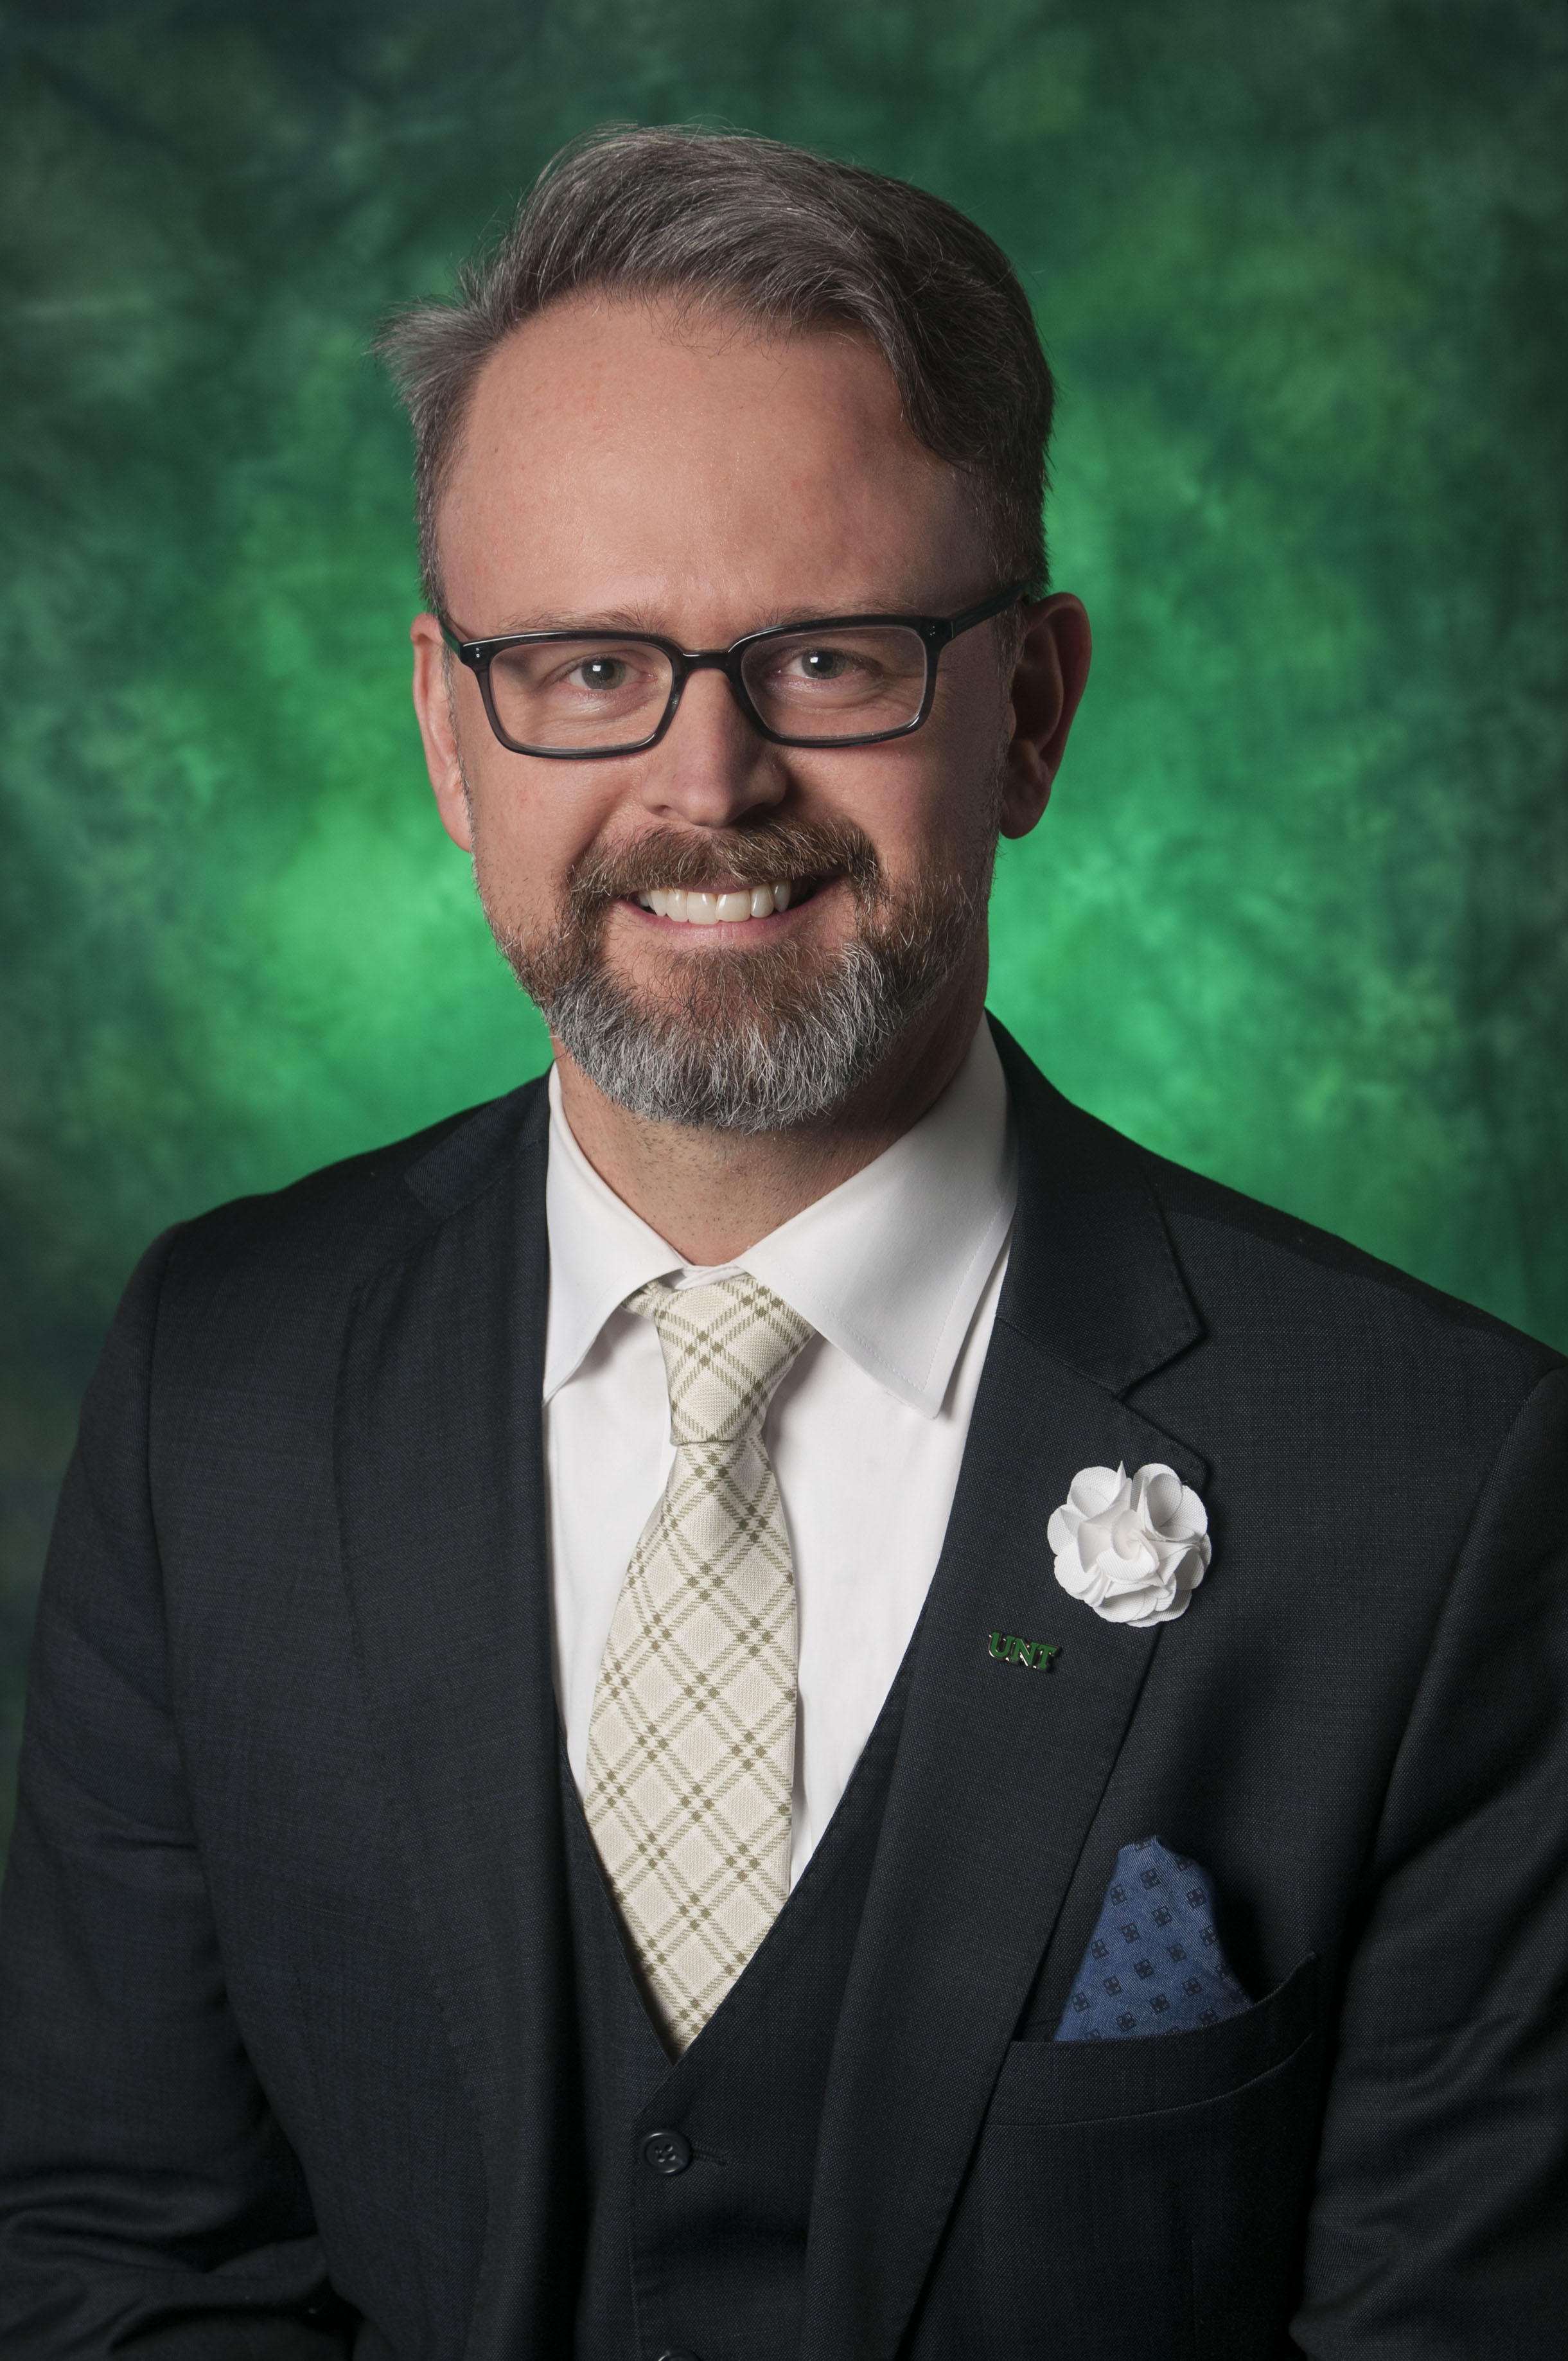 Neale R. Chumbler has been named dean of the University of North Texas College of Health and Public Service. His appointment is effective July 1, 2018.